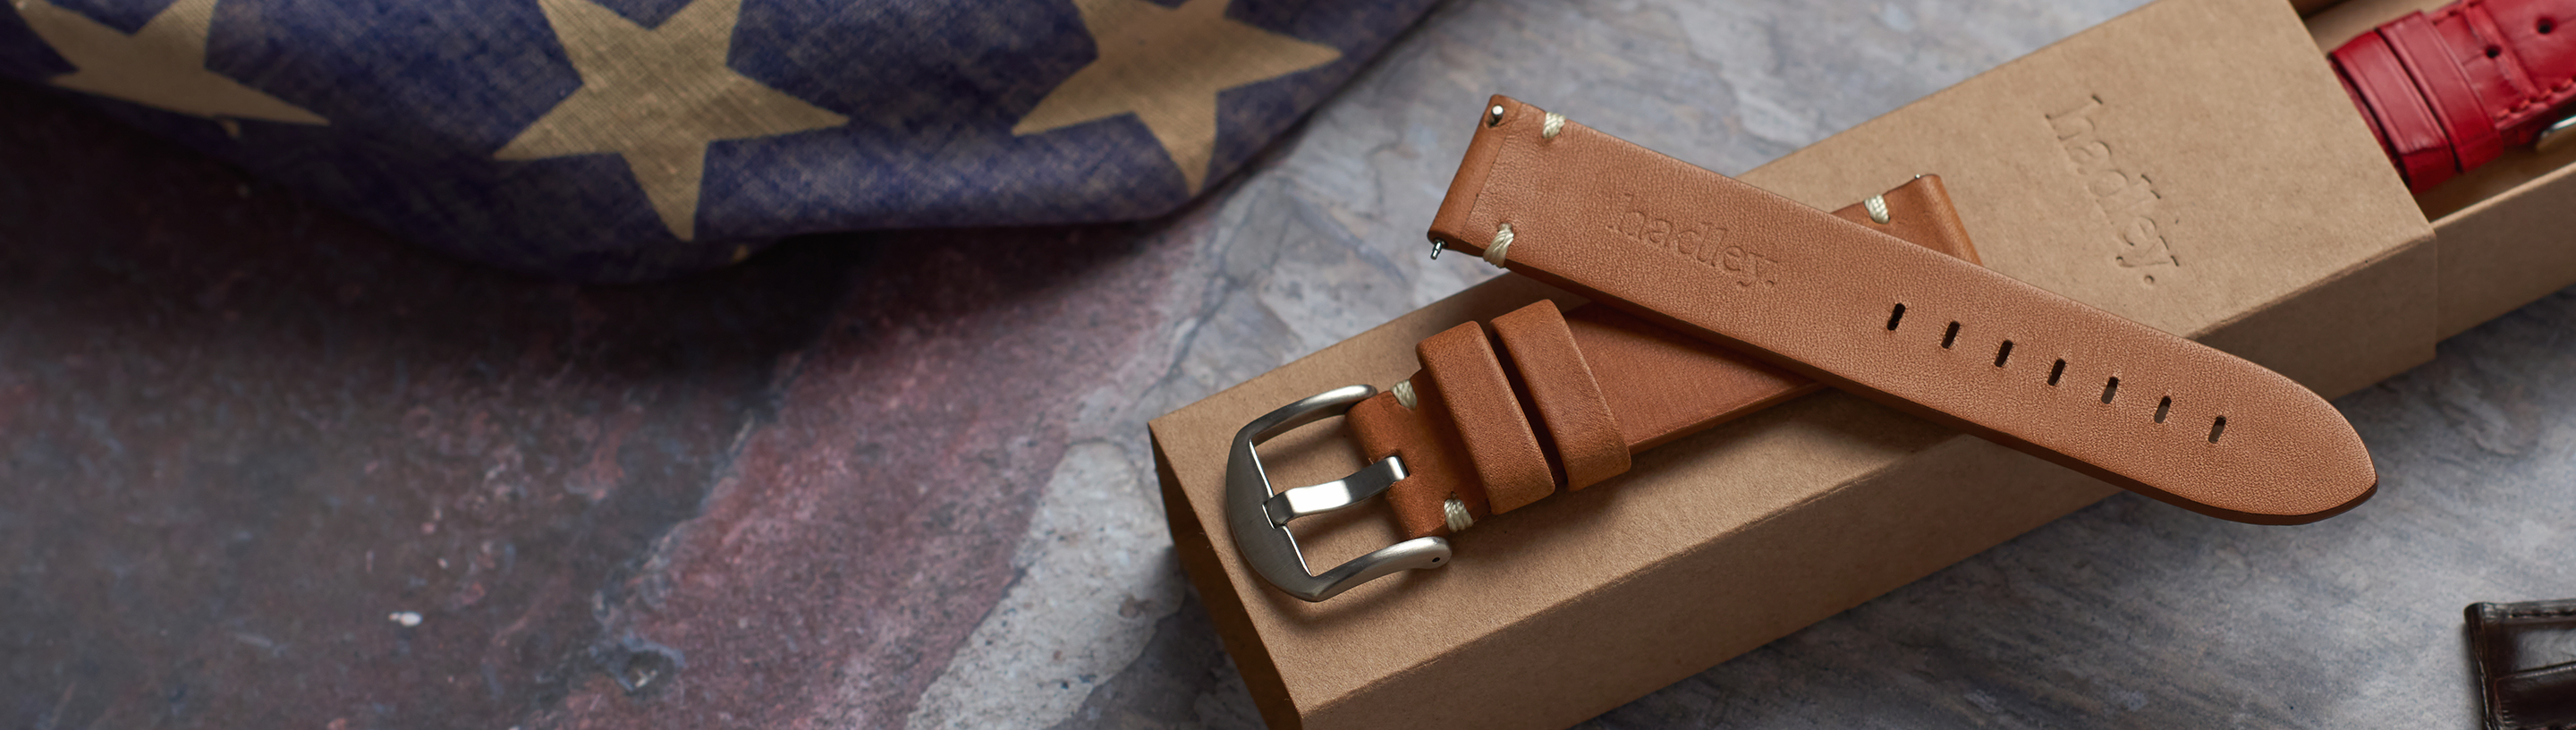 Shop Made in America Watch Bands for Conventional & Apple Watches